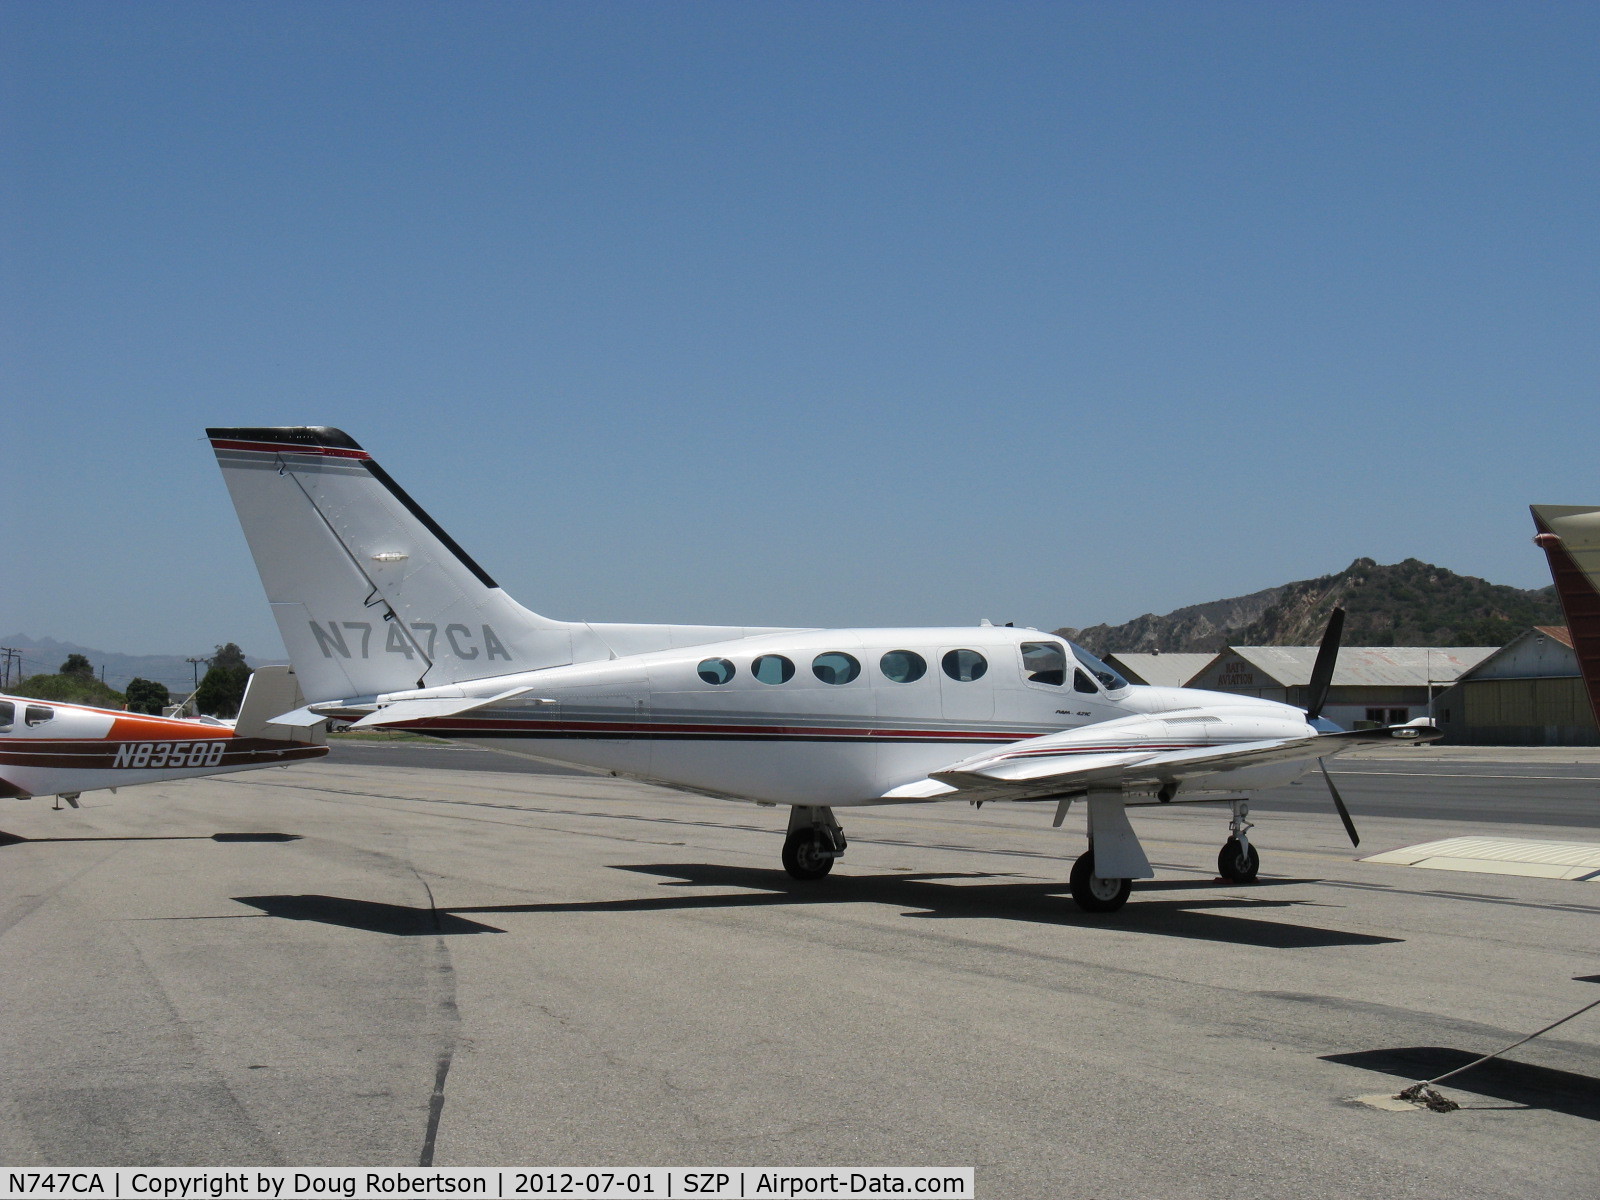 N747CA, Cessna 421C Golden Eagle C/N 421C0850, 1980 Cessna 421C GOLDEN EAGLE, Continental GTSIO-520-L & -N turbosupercharged geared counter-rotating engine upgrade conversion by RAM Aircraft LP, 375 Hp ea. Pressurized, 223 ktas cruise at 20K